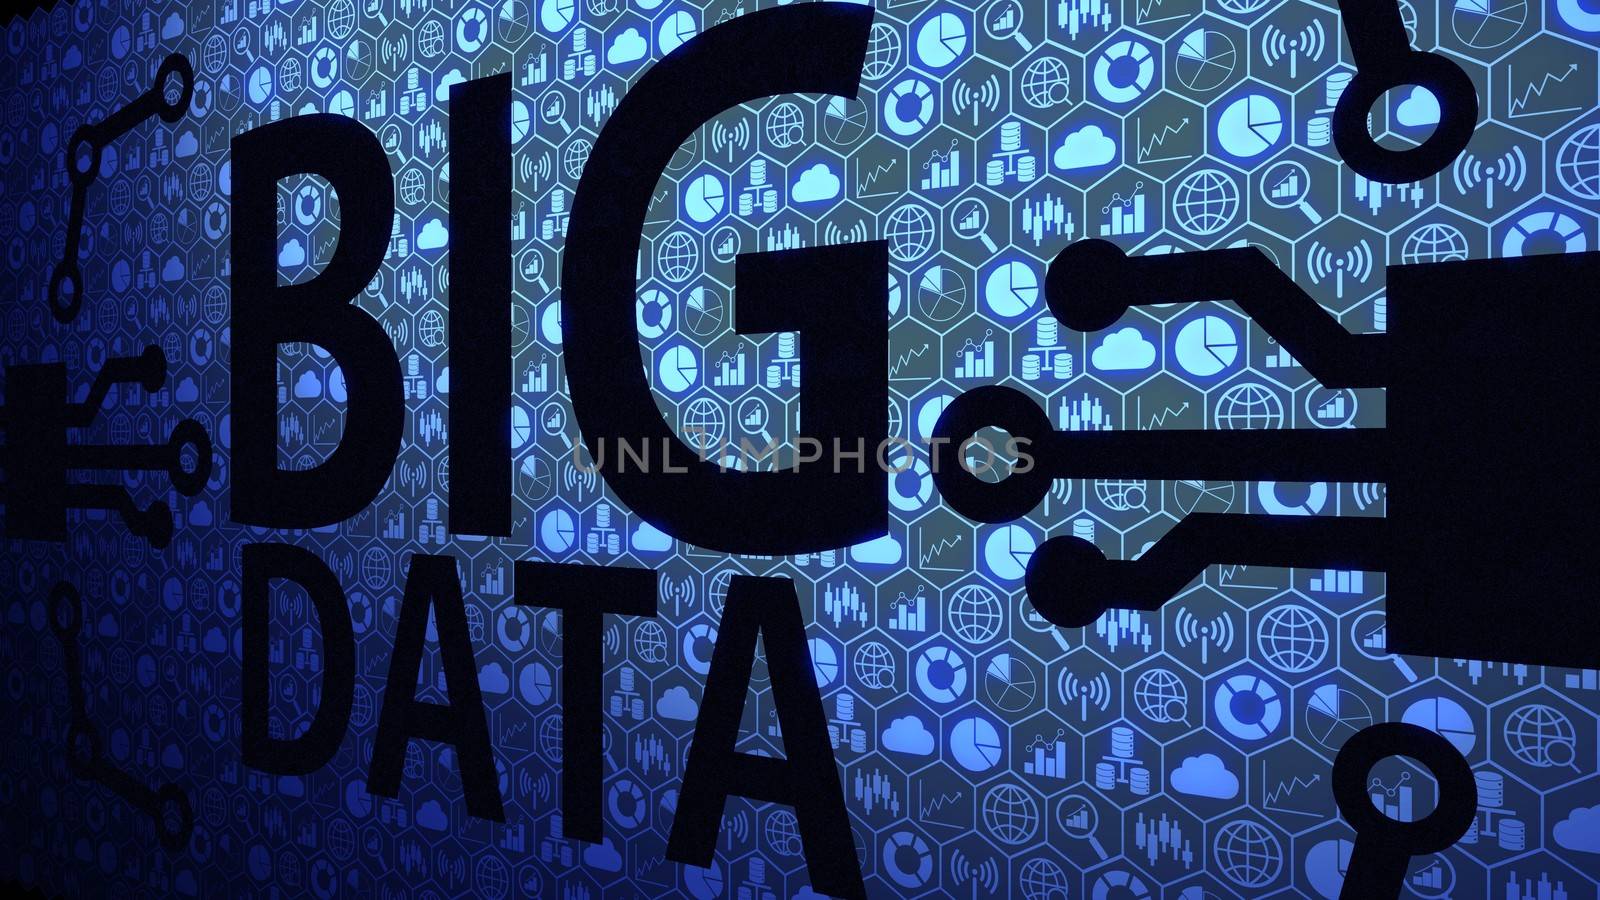 Big Data Big Picture Background Composed of Big Data Icons and Big Data Text with Blue Light Ver.4 of 4 (Different Angle)